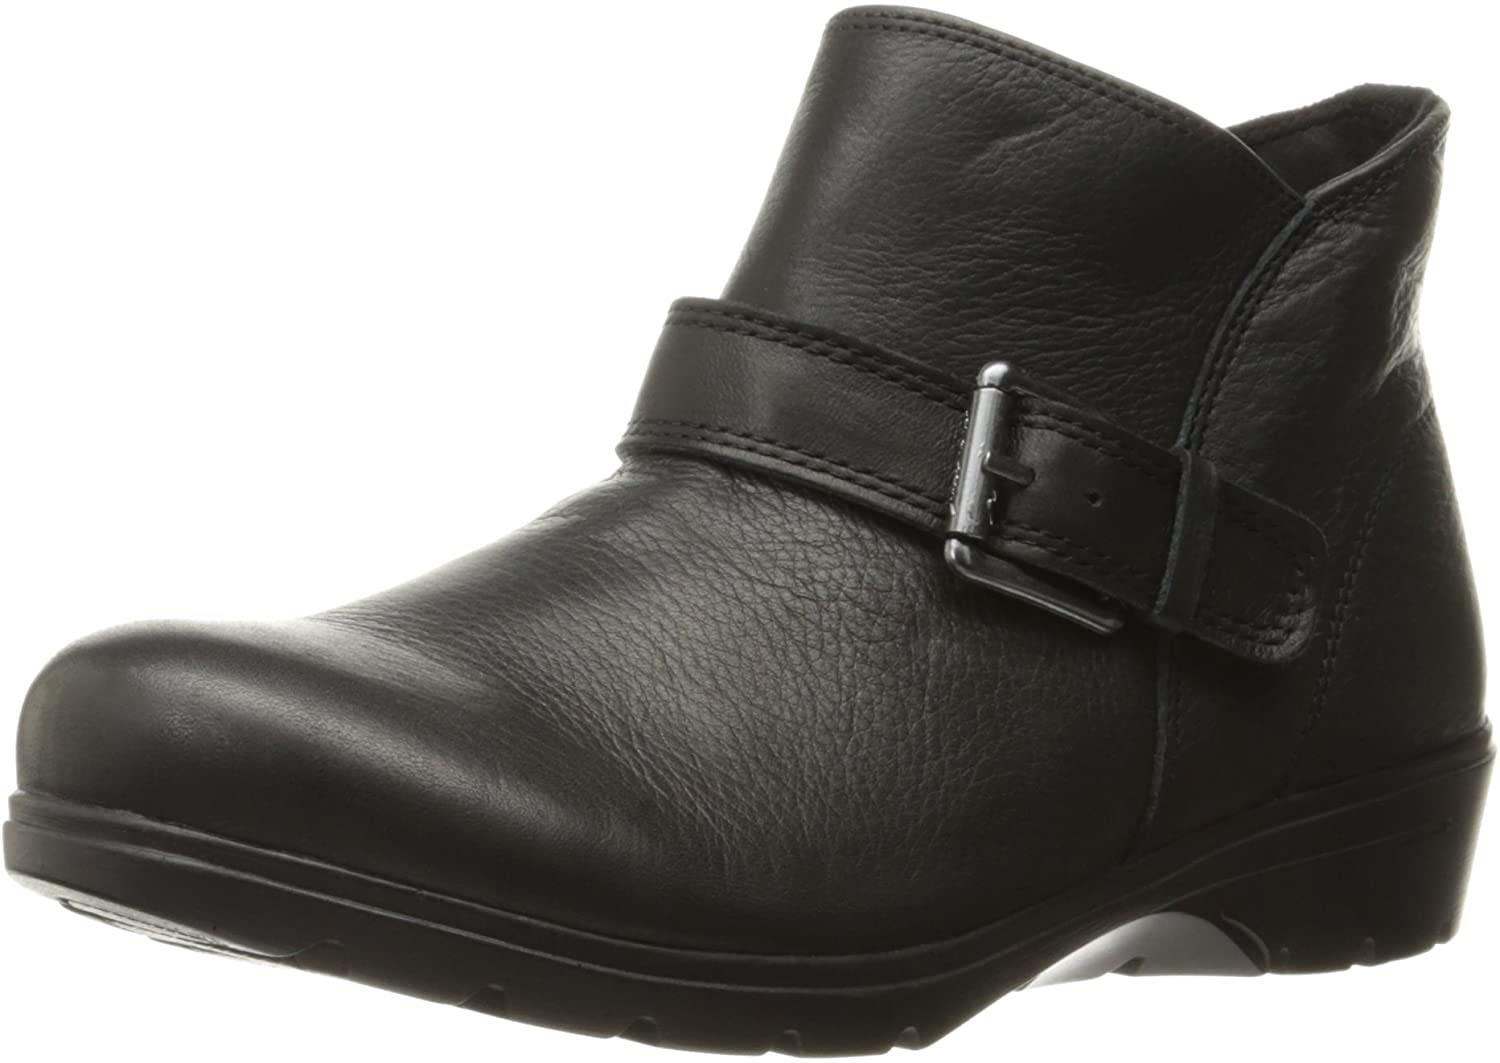 Skechers - Womens Relaxed Fit: Metronome - Mod Squad Boots